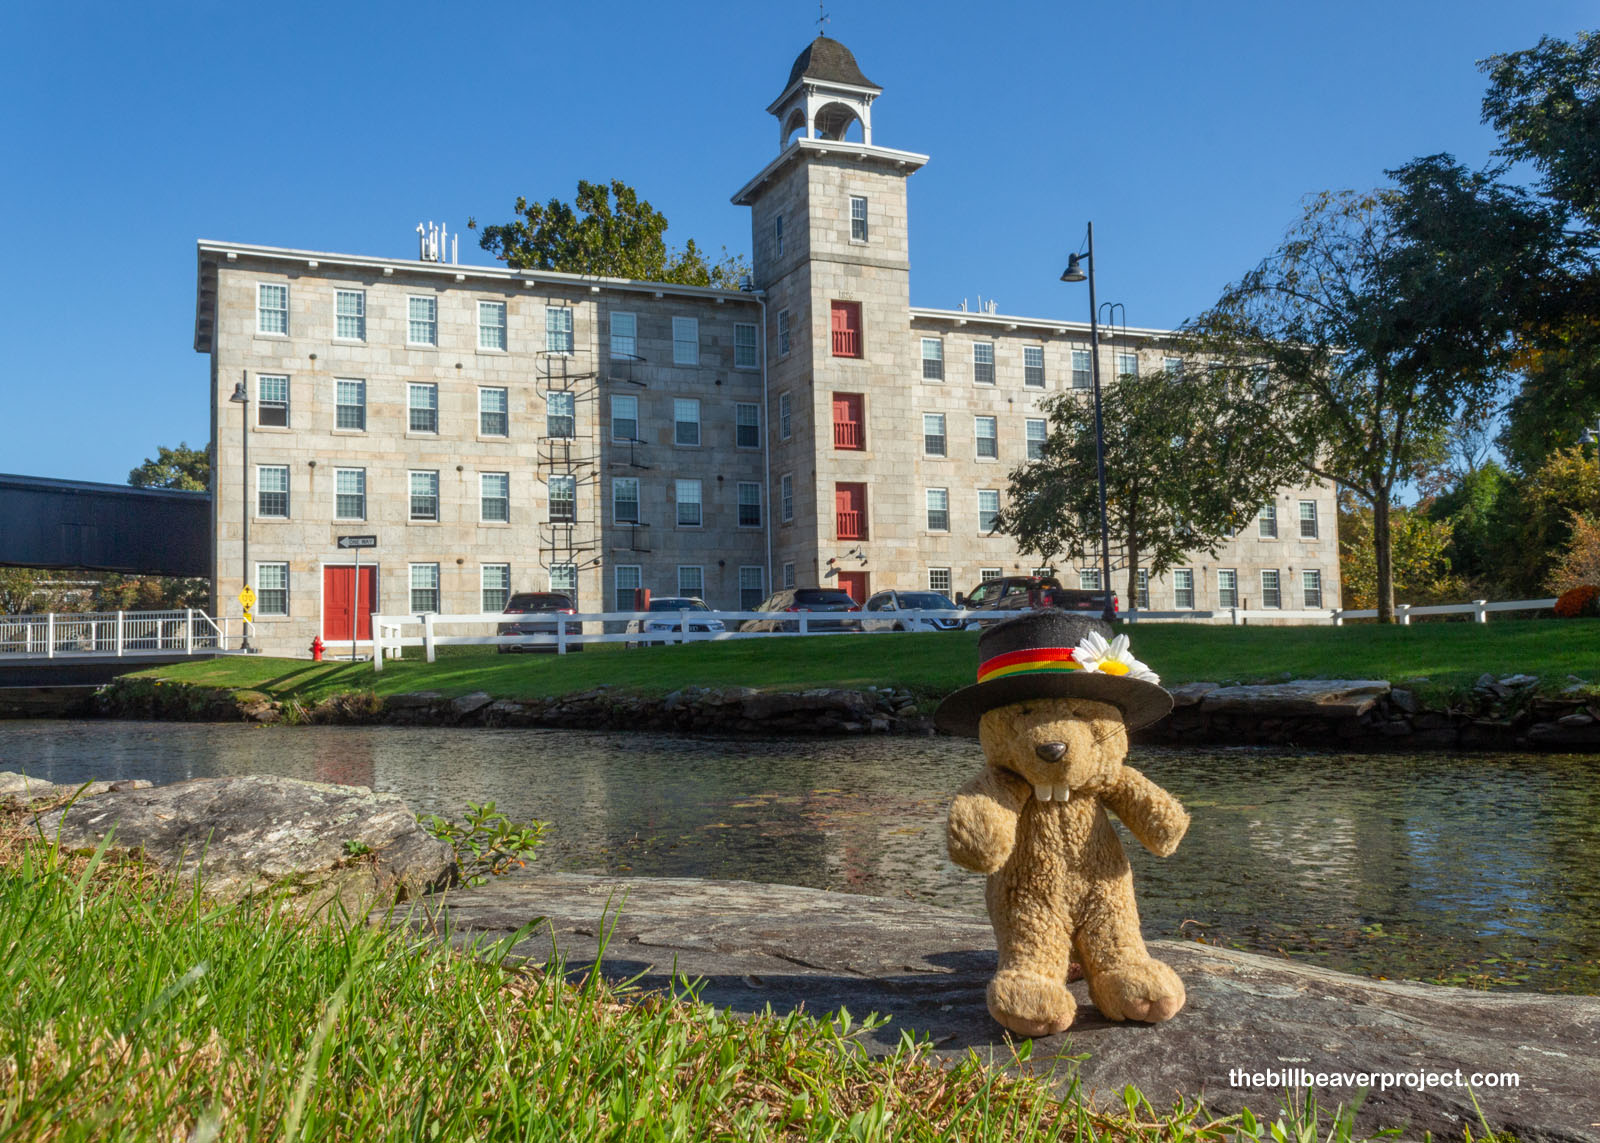 The mill of the company town of Slatersville!